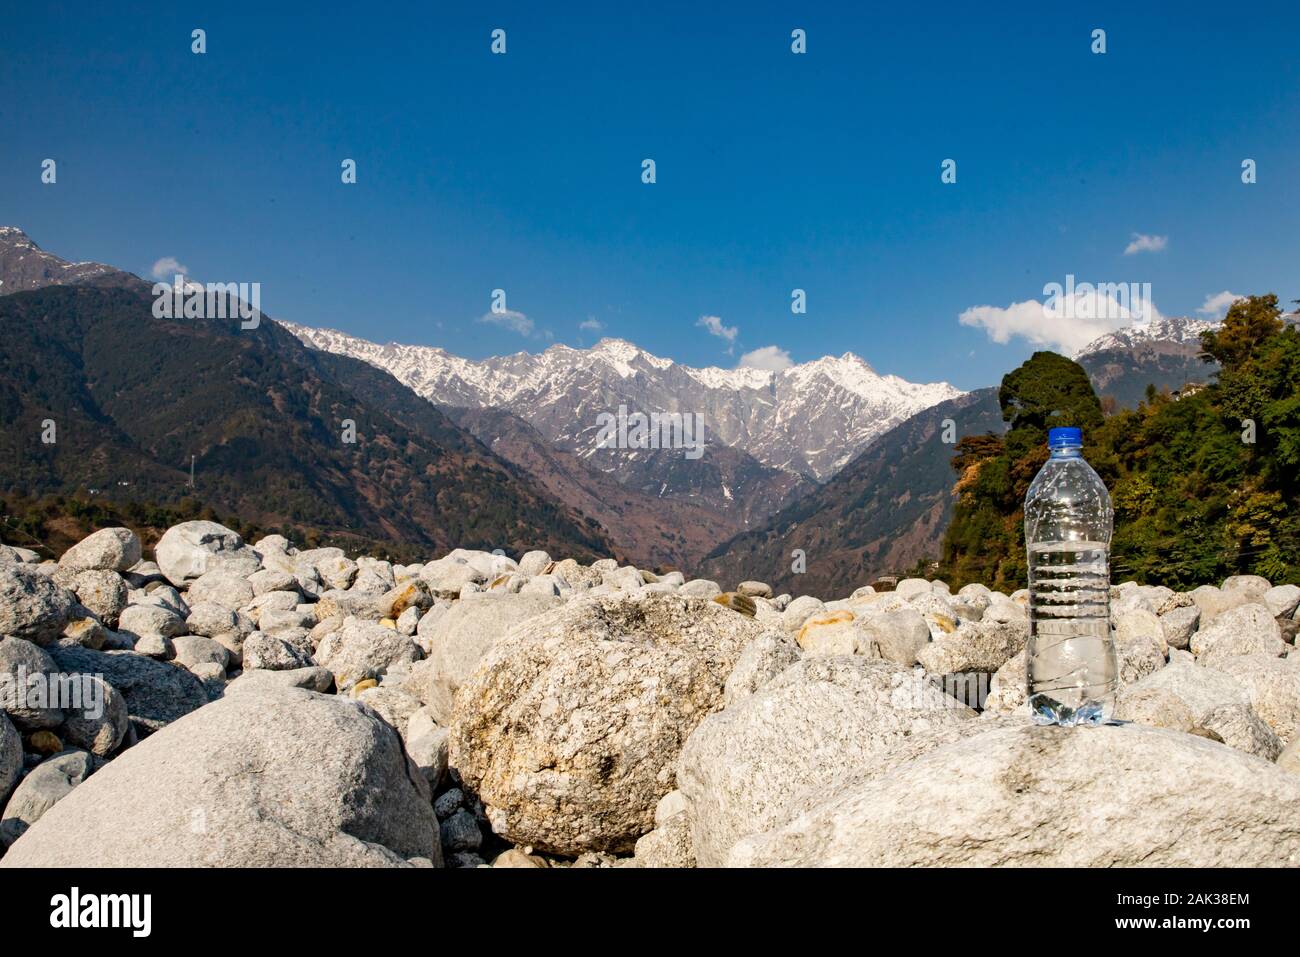 Natural Pure Water Filtration from Himalayas.Hills of Himalaya with Water Bottle .Water Purification System of Himalayas Stock Photo